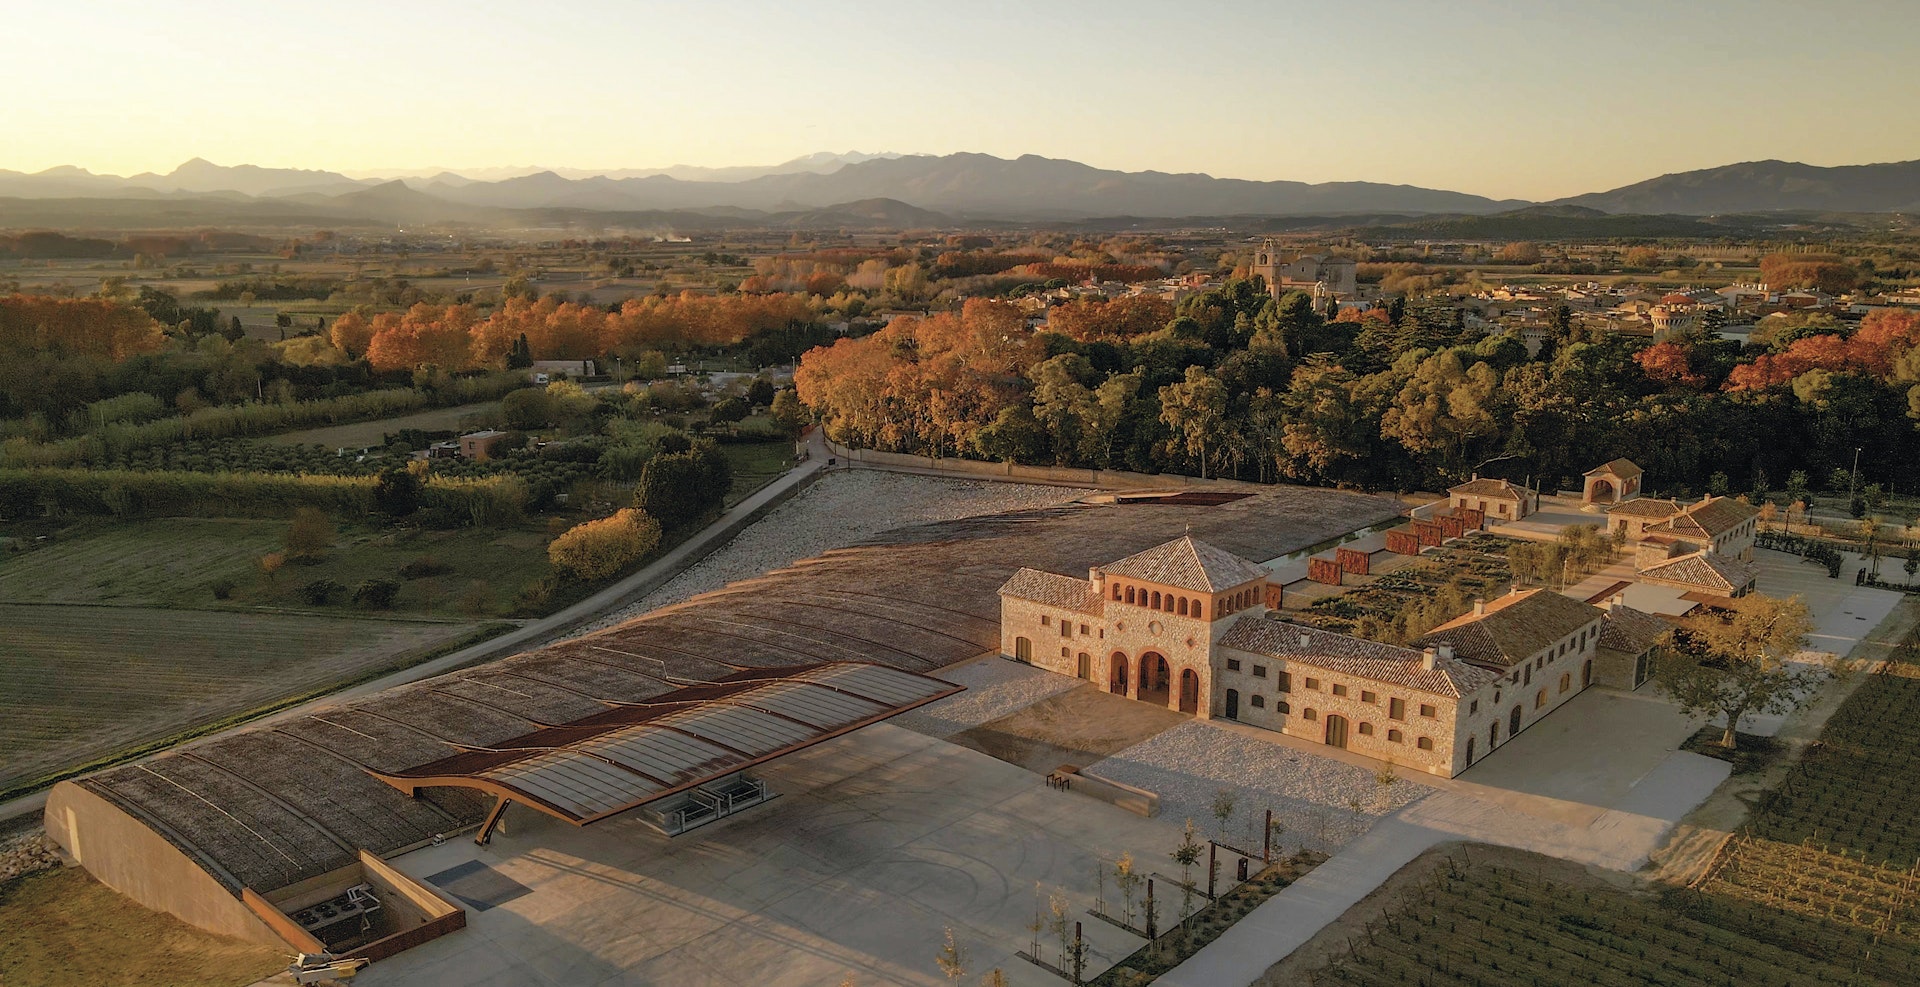 Aerial shot of a wine estate set in a vast stretch of countryside backed by hills